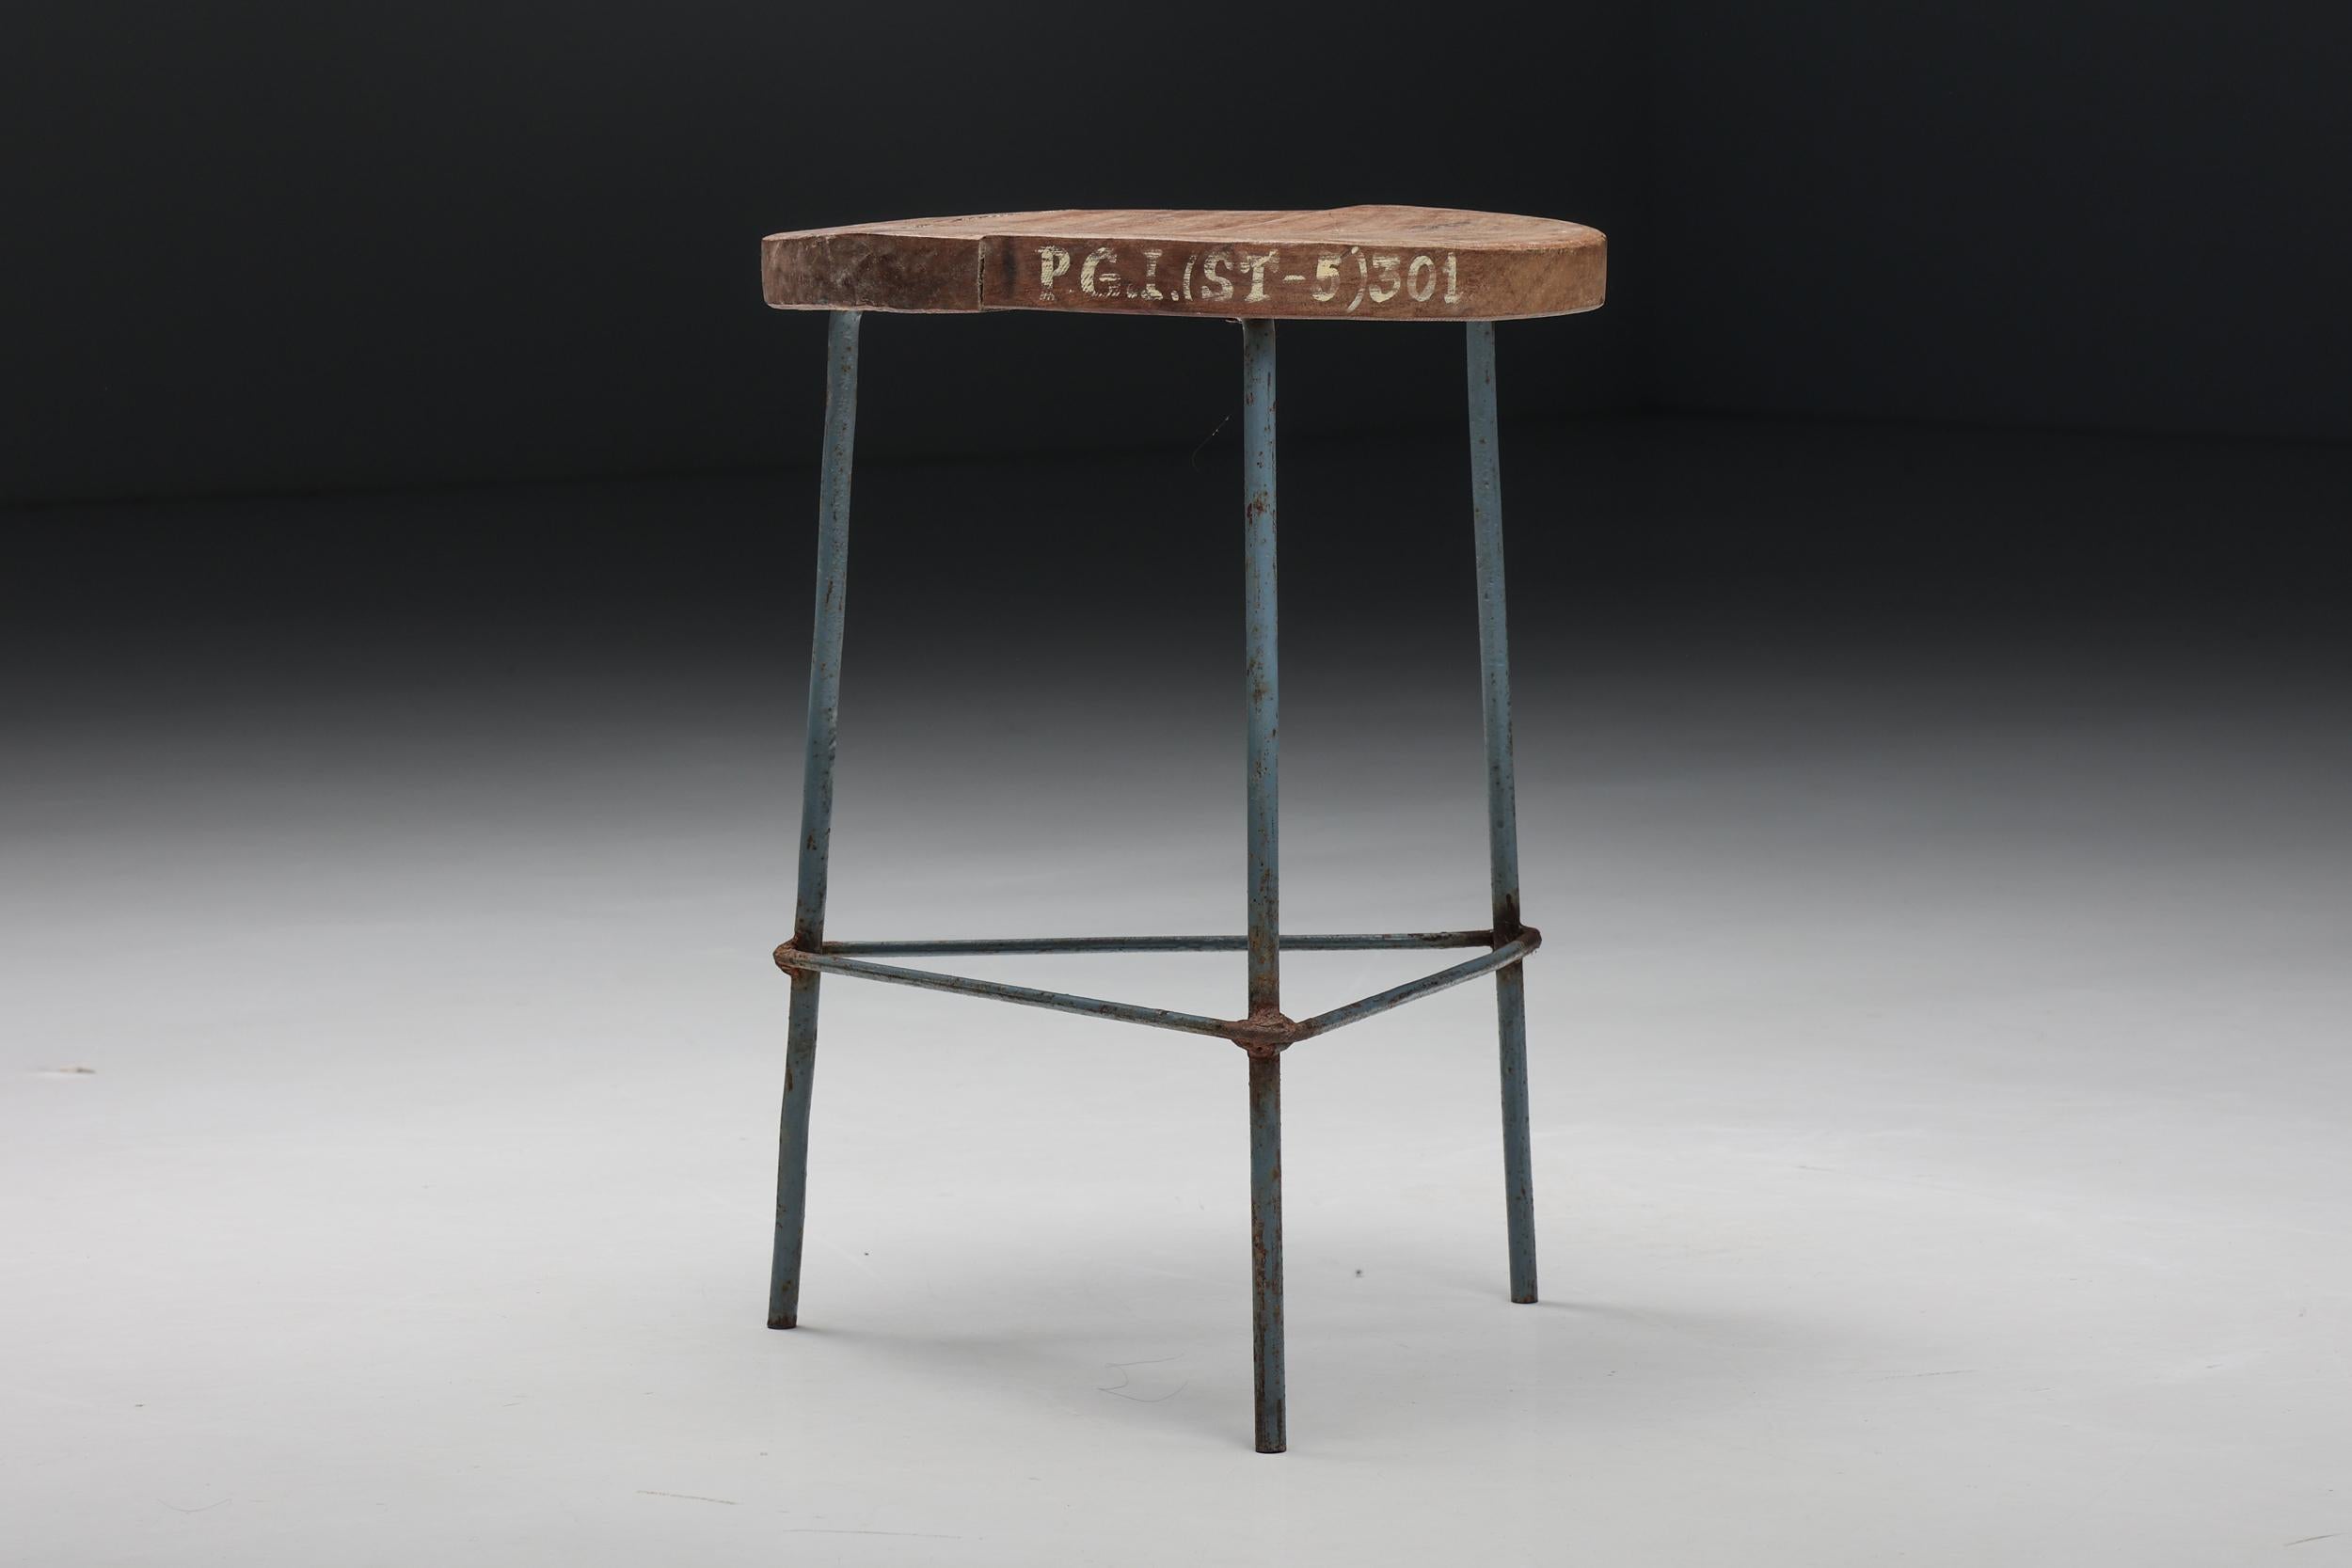 Mid-20th Century Pierre Jeanneret Chandigarh Stools, Metal & Wood, India, Patina, 1960's